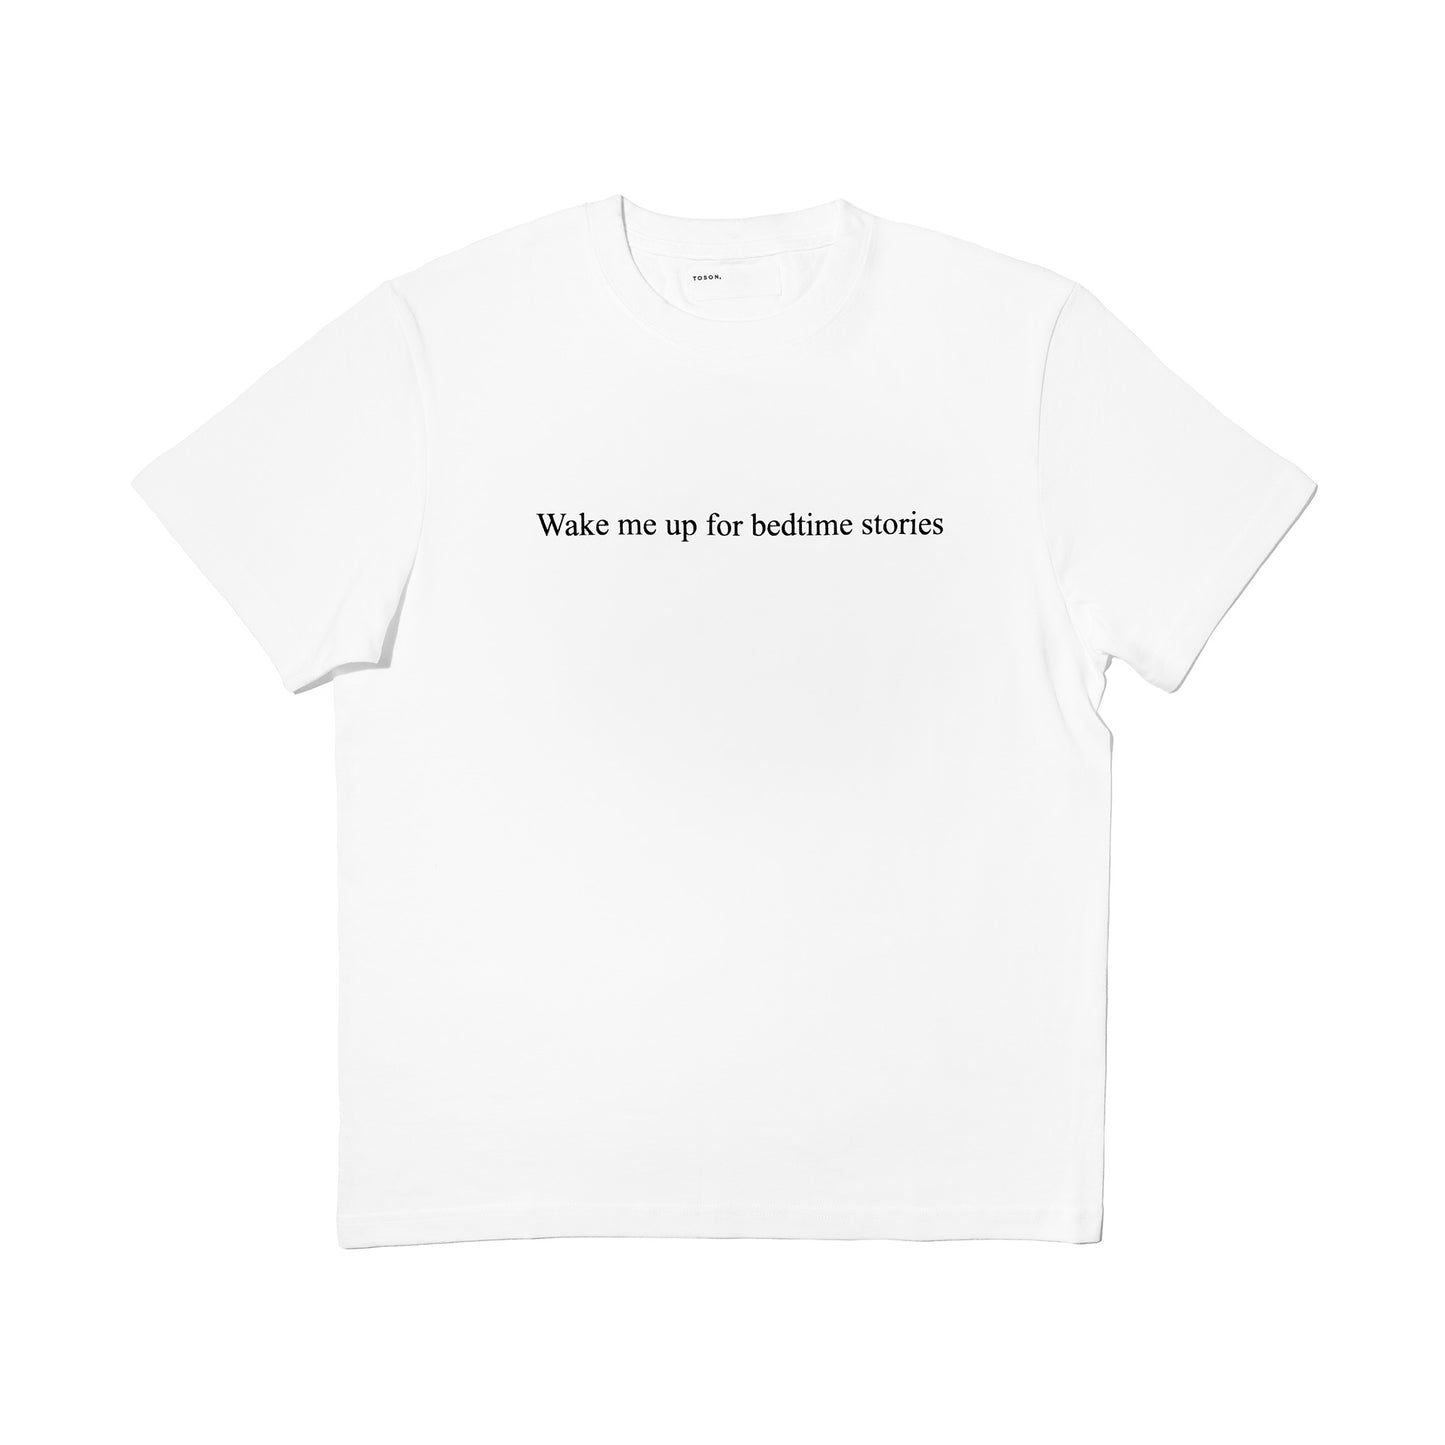 "Wake me up for bedtime stories" Print T-shirt